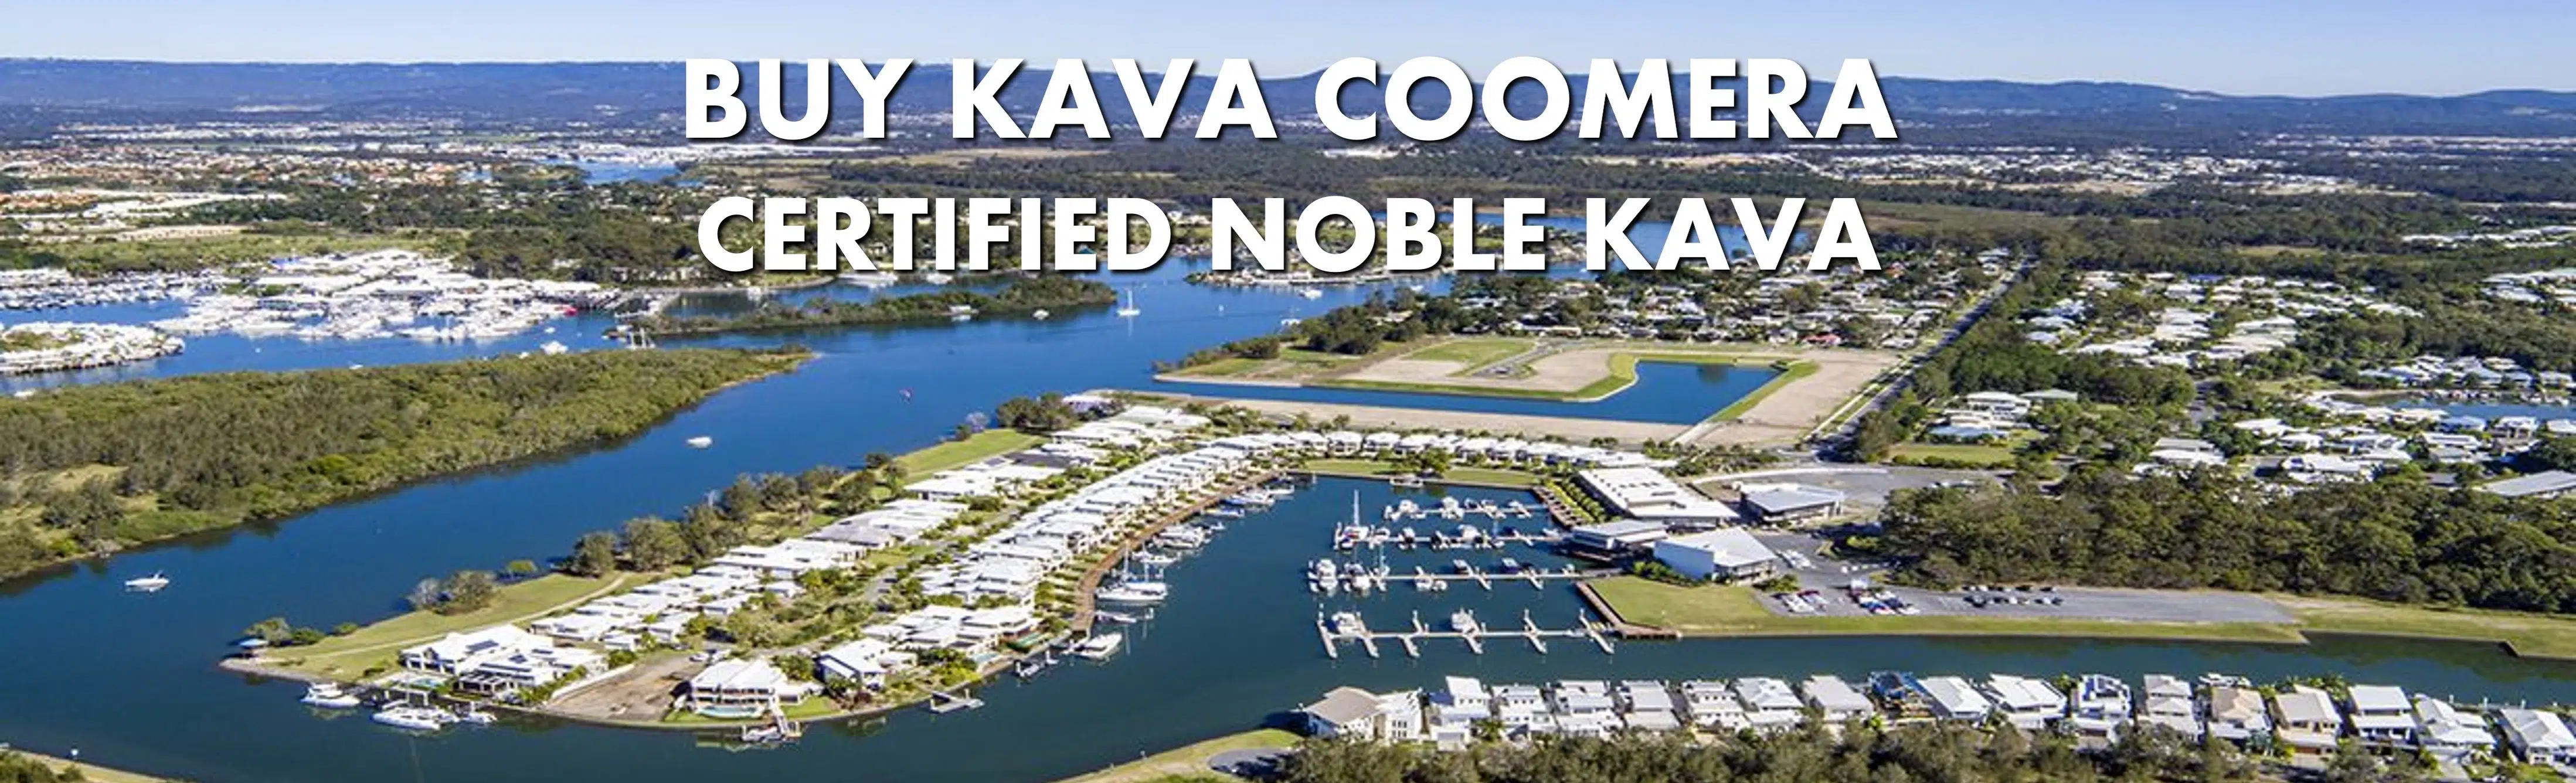 Coomera Quays development in Coomera Queensland with caption Buy Kava Coomera Certified Noble Kava